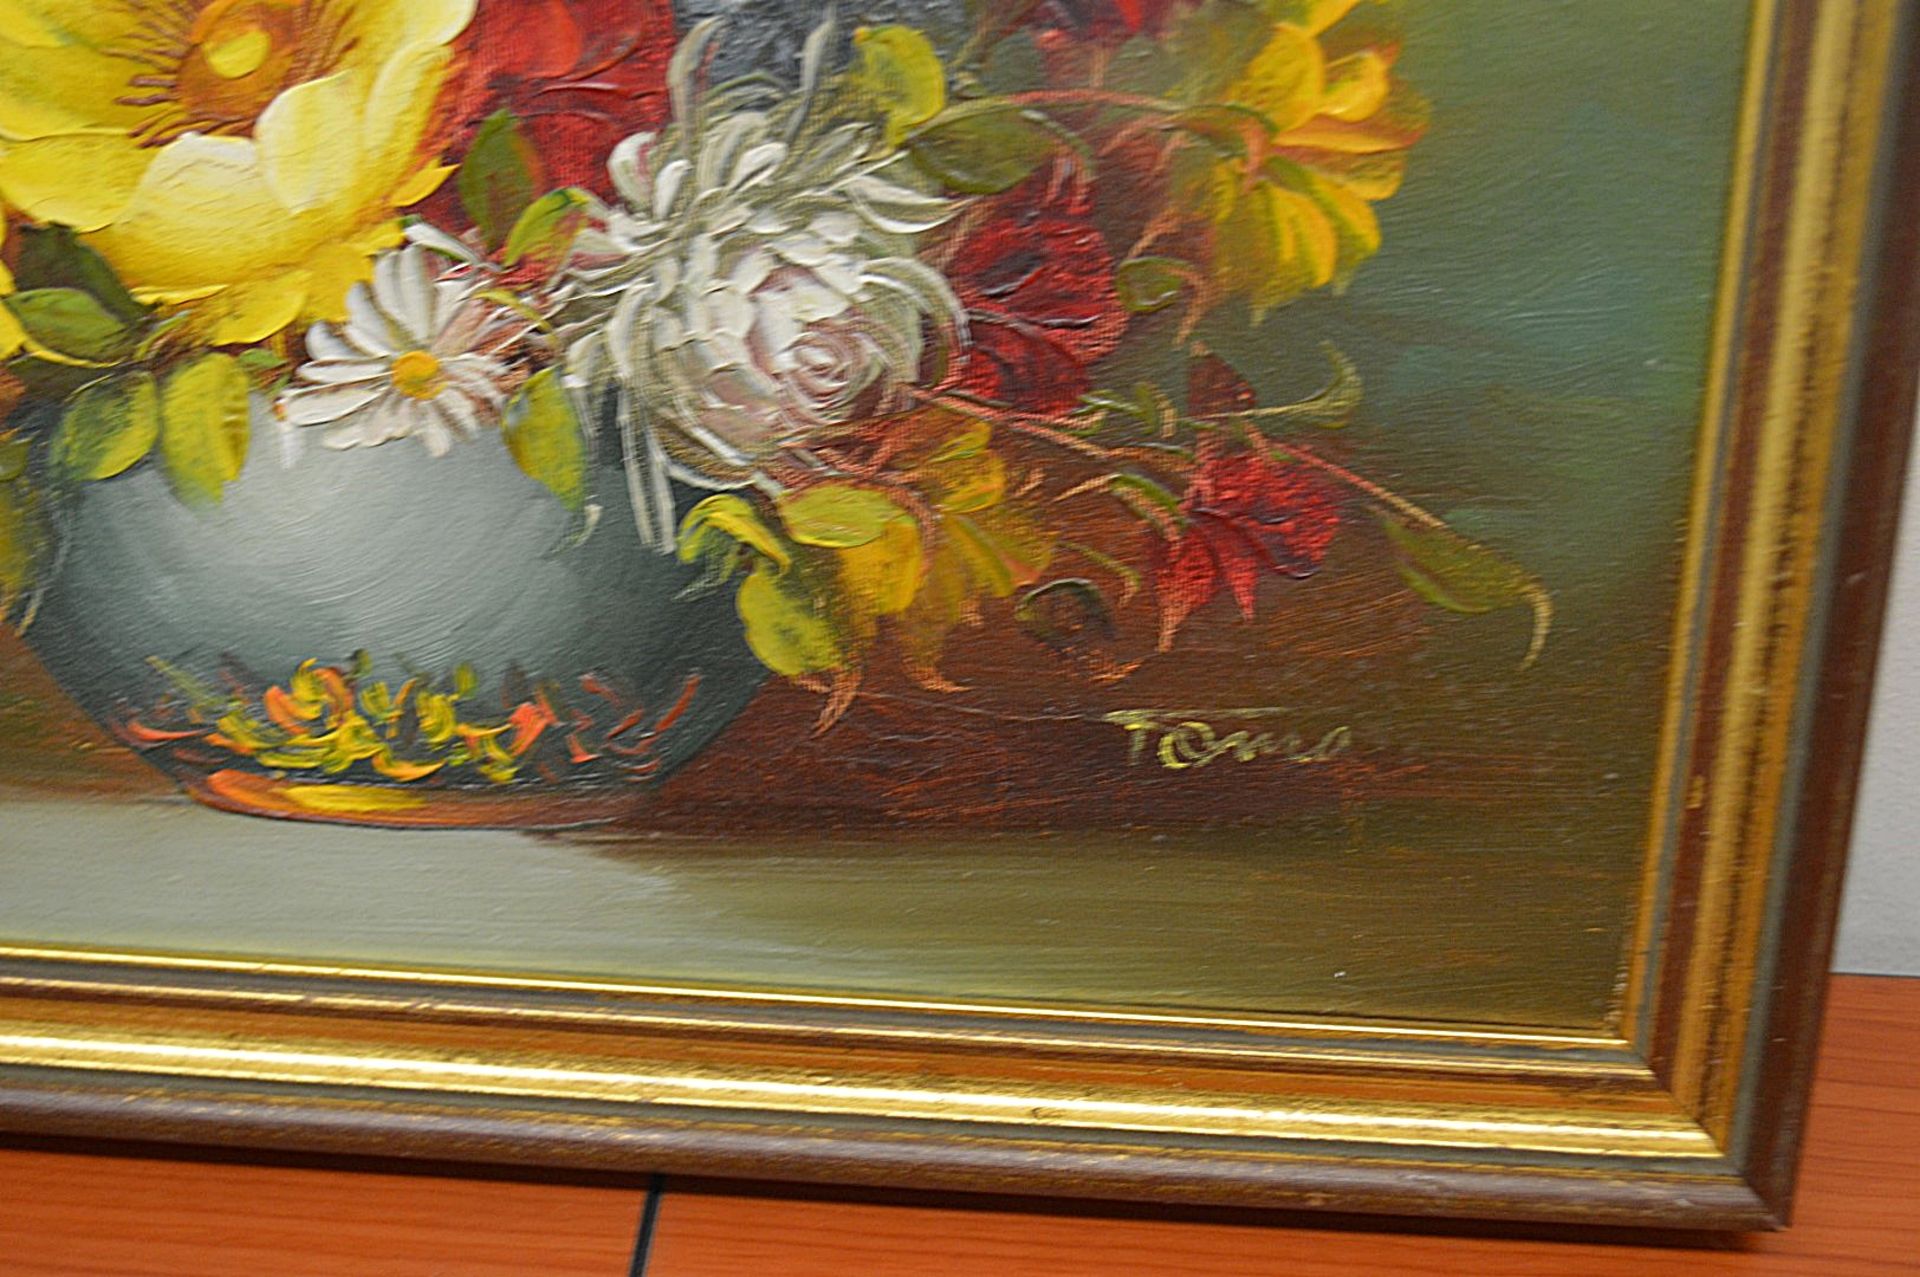 1 x Original Oil Painting Of Flowers On Canvas - Signed By The Artist - Dimensions: 36 x 46cm - Ref: - Image 5 of 6